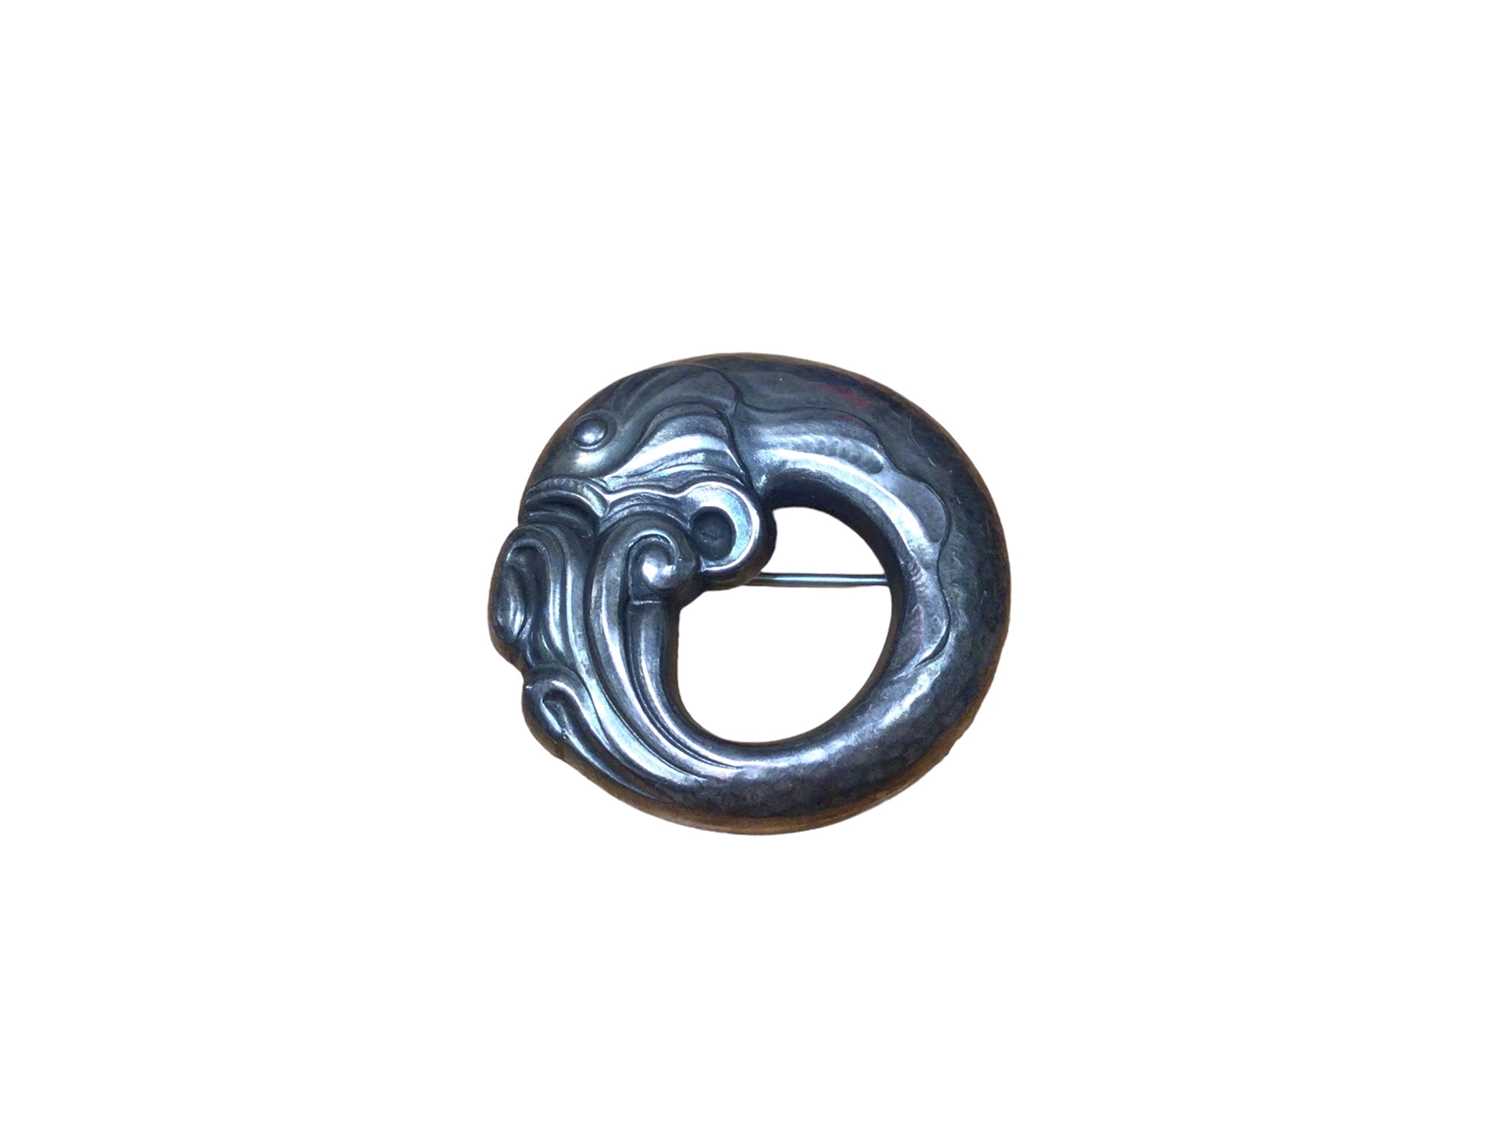 Lot 183 - Georg Jensen silver coiled fish brooch, number 10